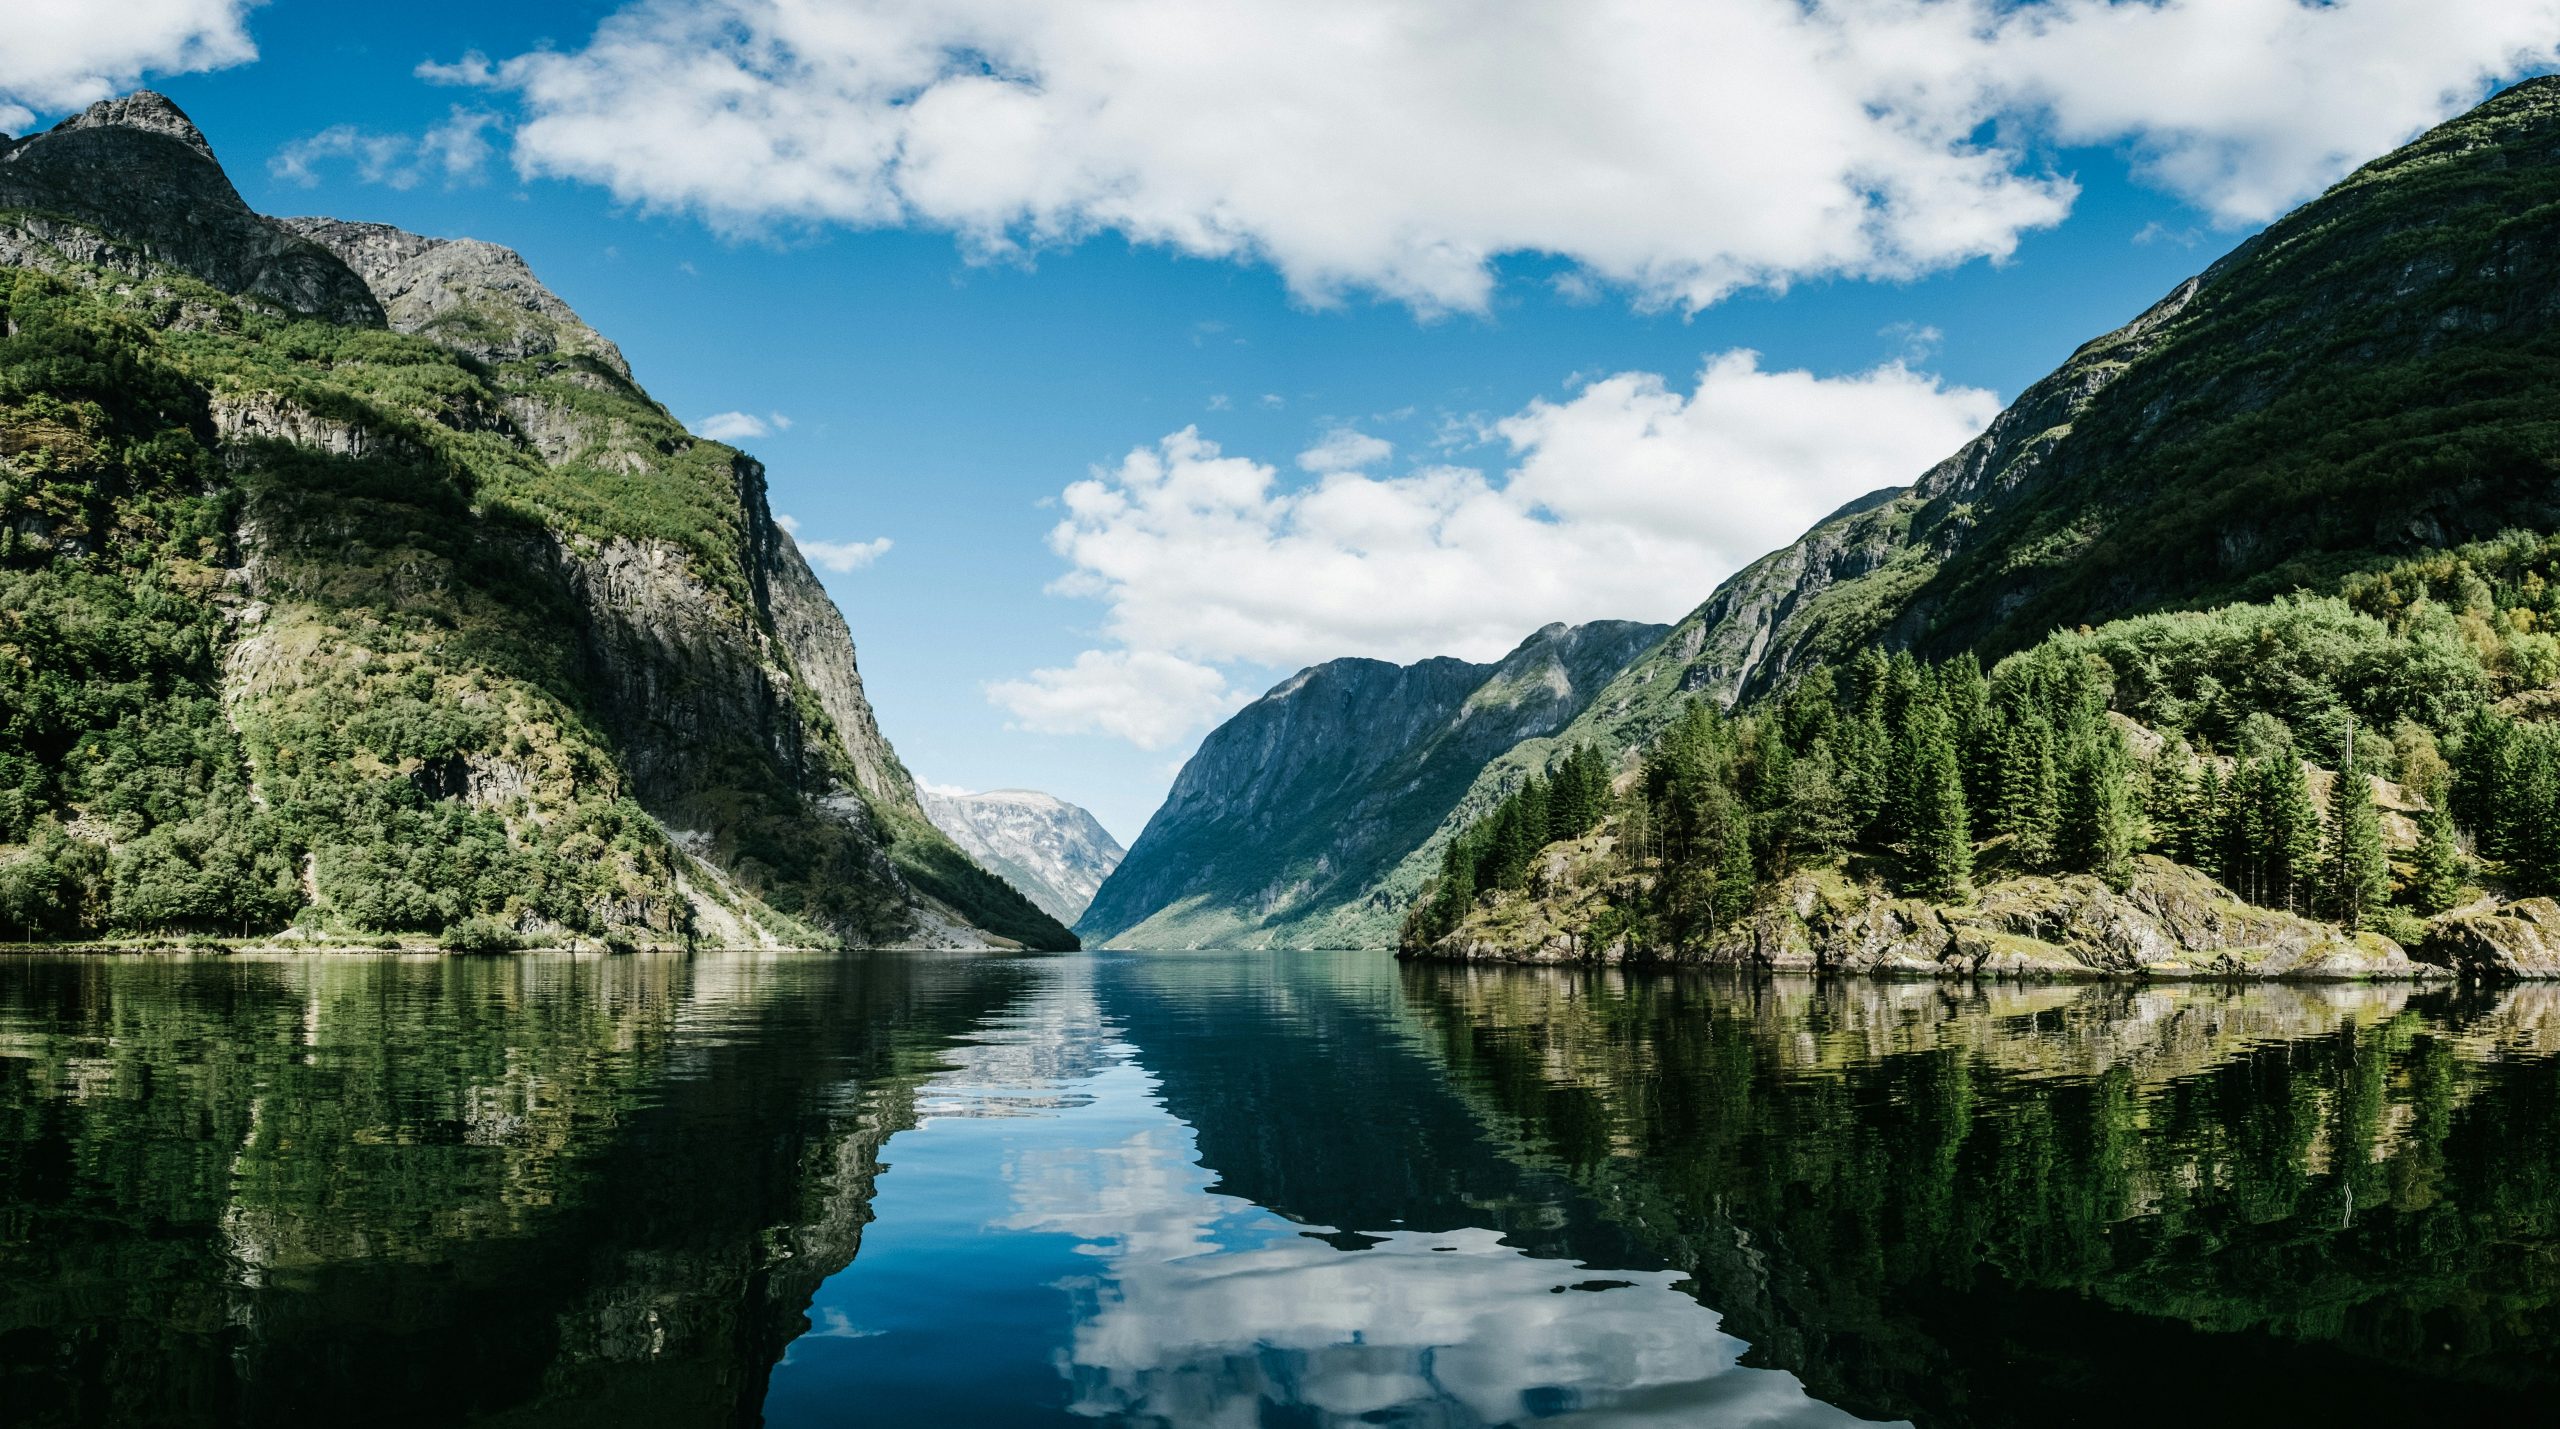 discover the breathtaking fjords of norway, with their stunning landscapes, dramatic cliffs, and crystal-clear waters. explore the natural beauty and unique charm of the fjords on an unforgettable adventure.